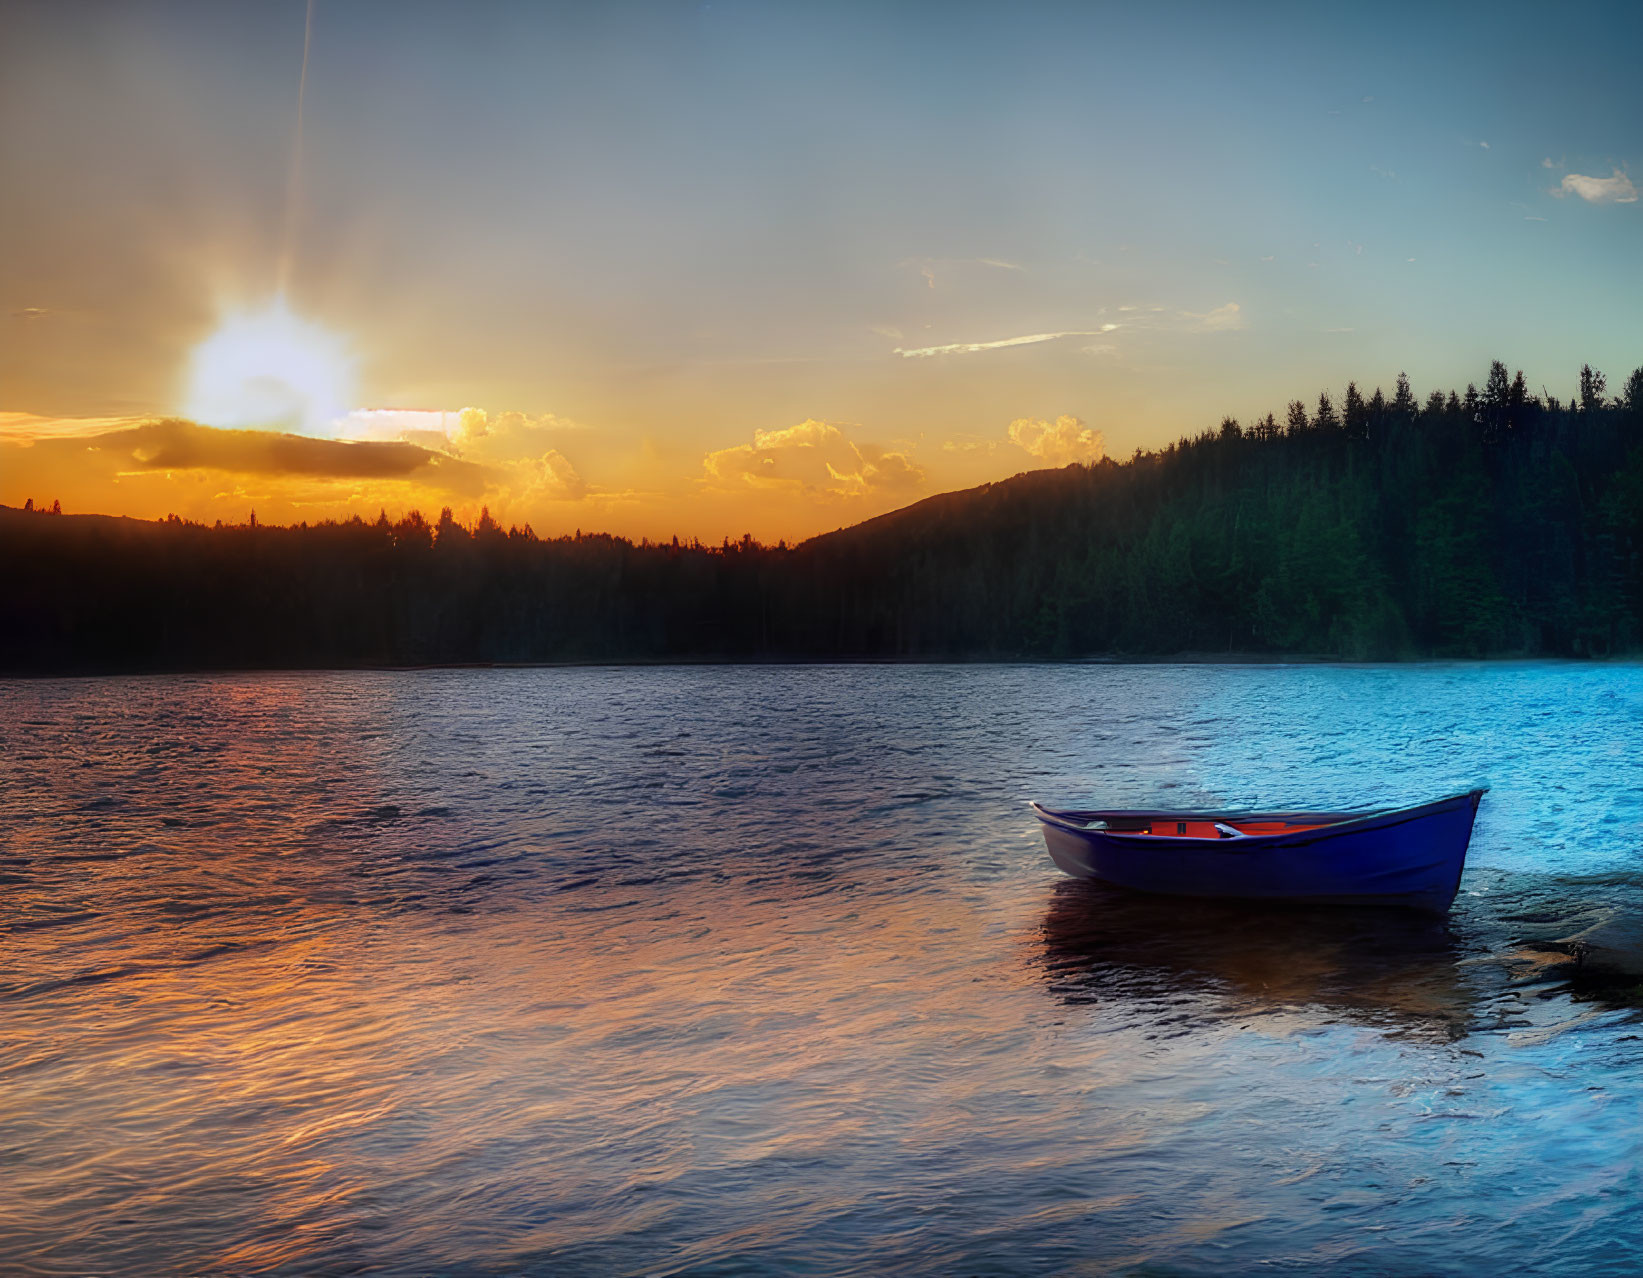 Tranquil sunset scene with solitary boat on lake and silhouetted trees